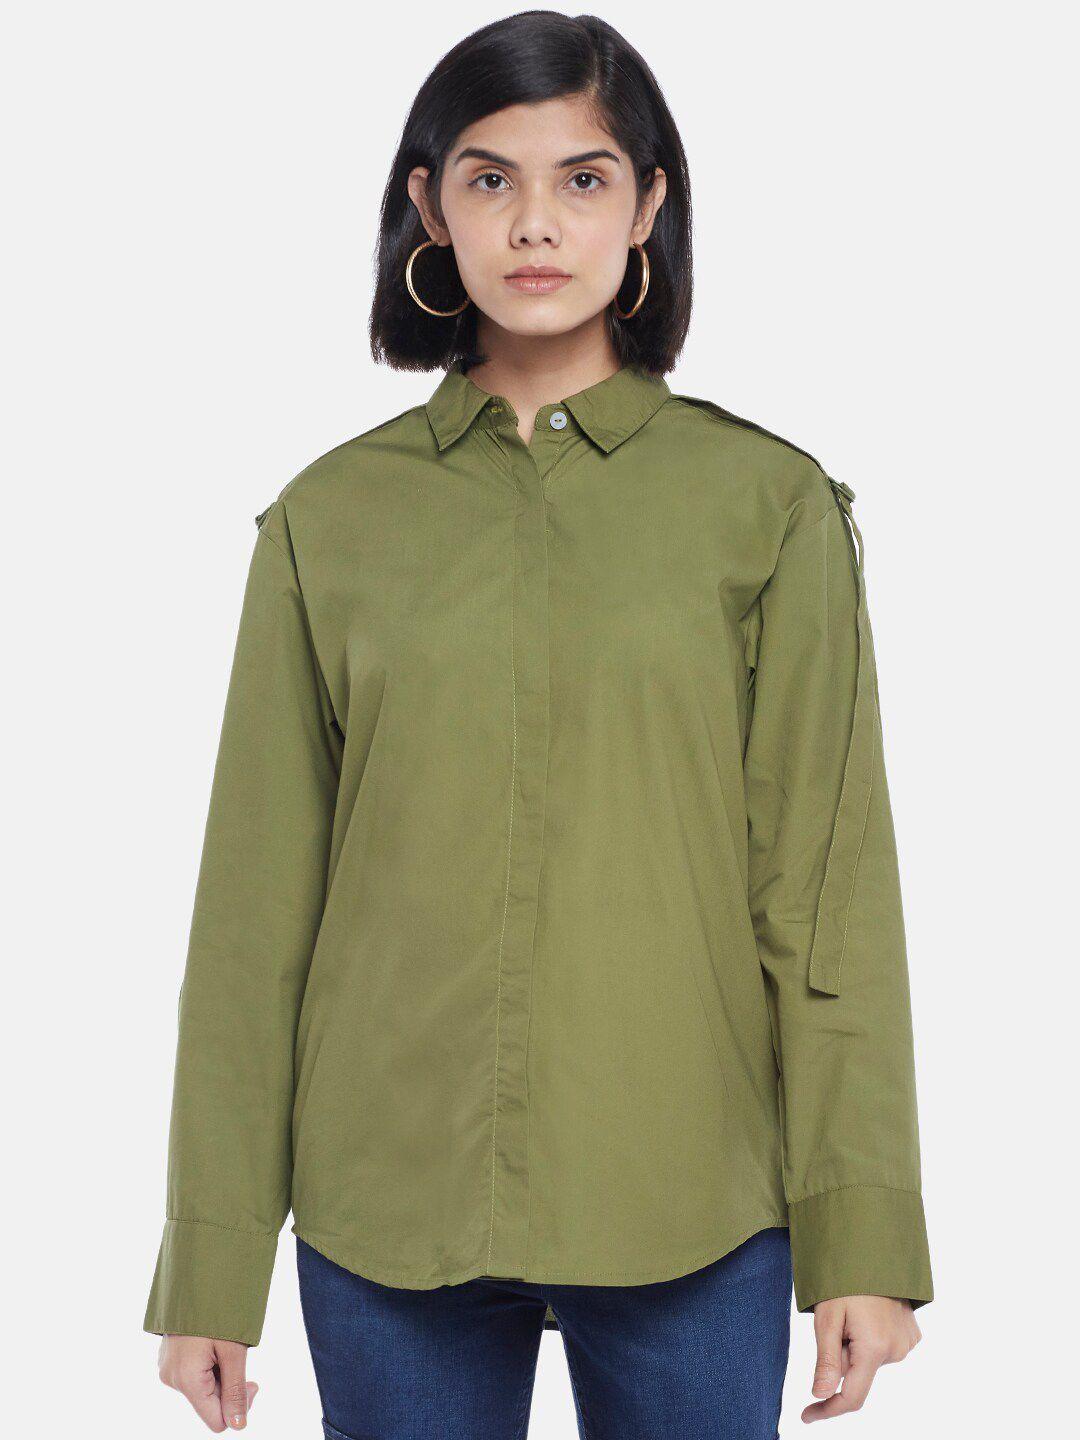 sf-jeans-by-pantaloons-women-olive-green-casual-shirt